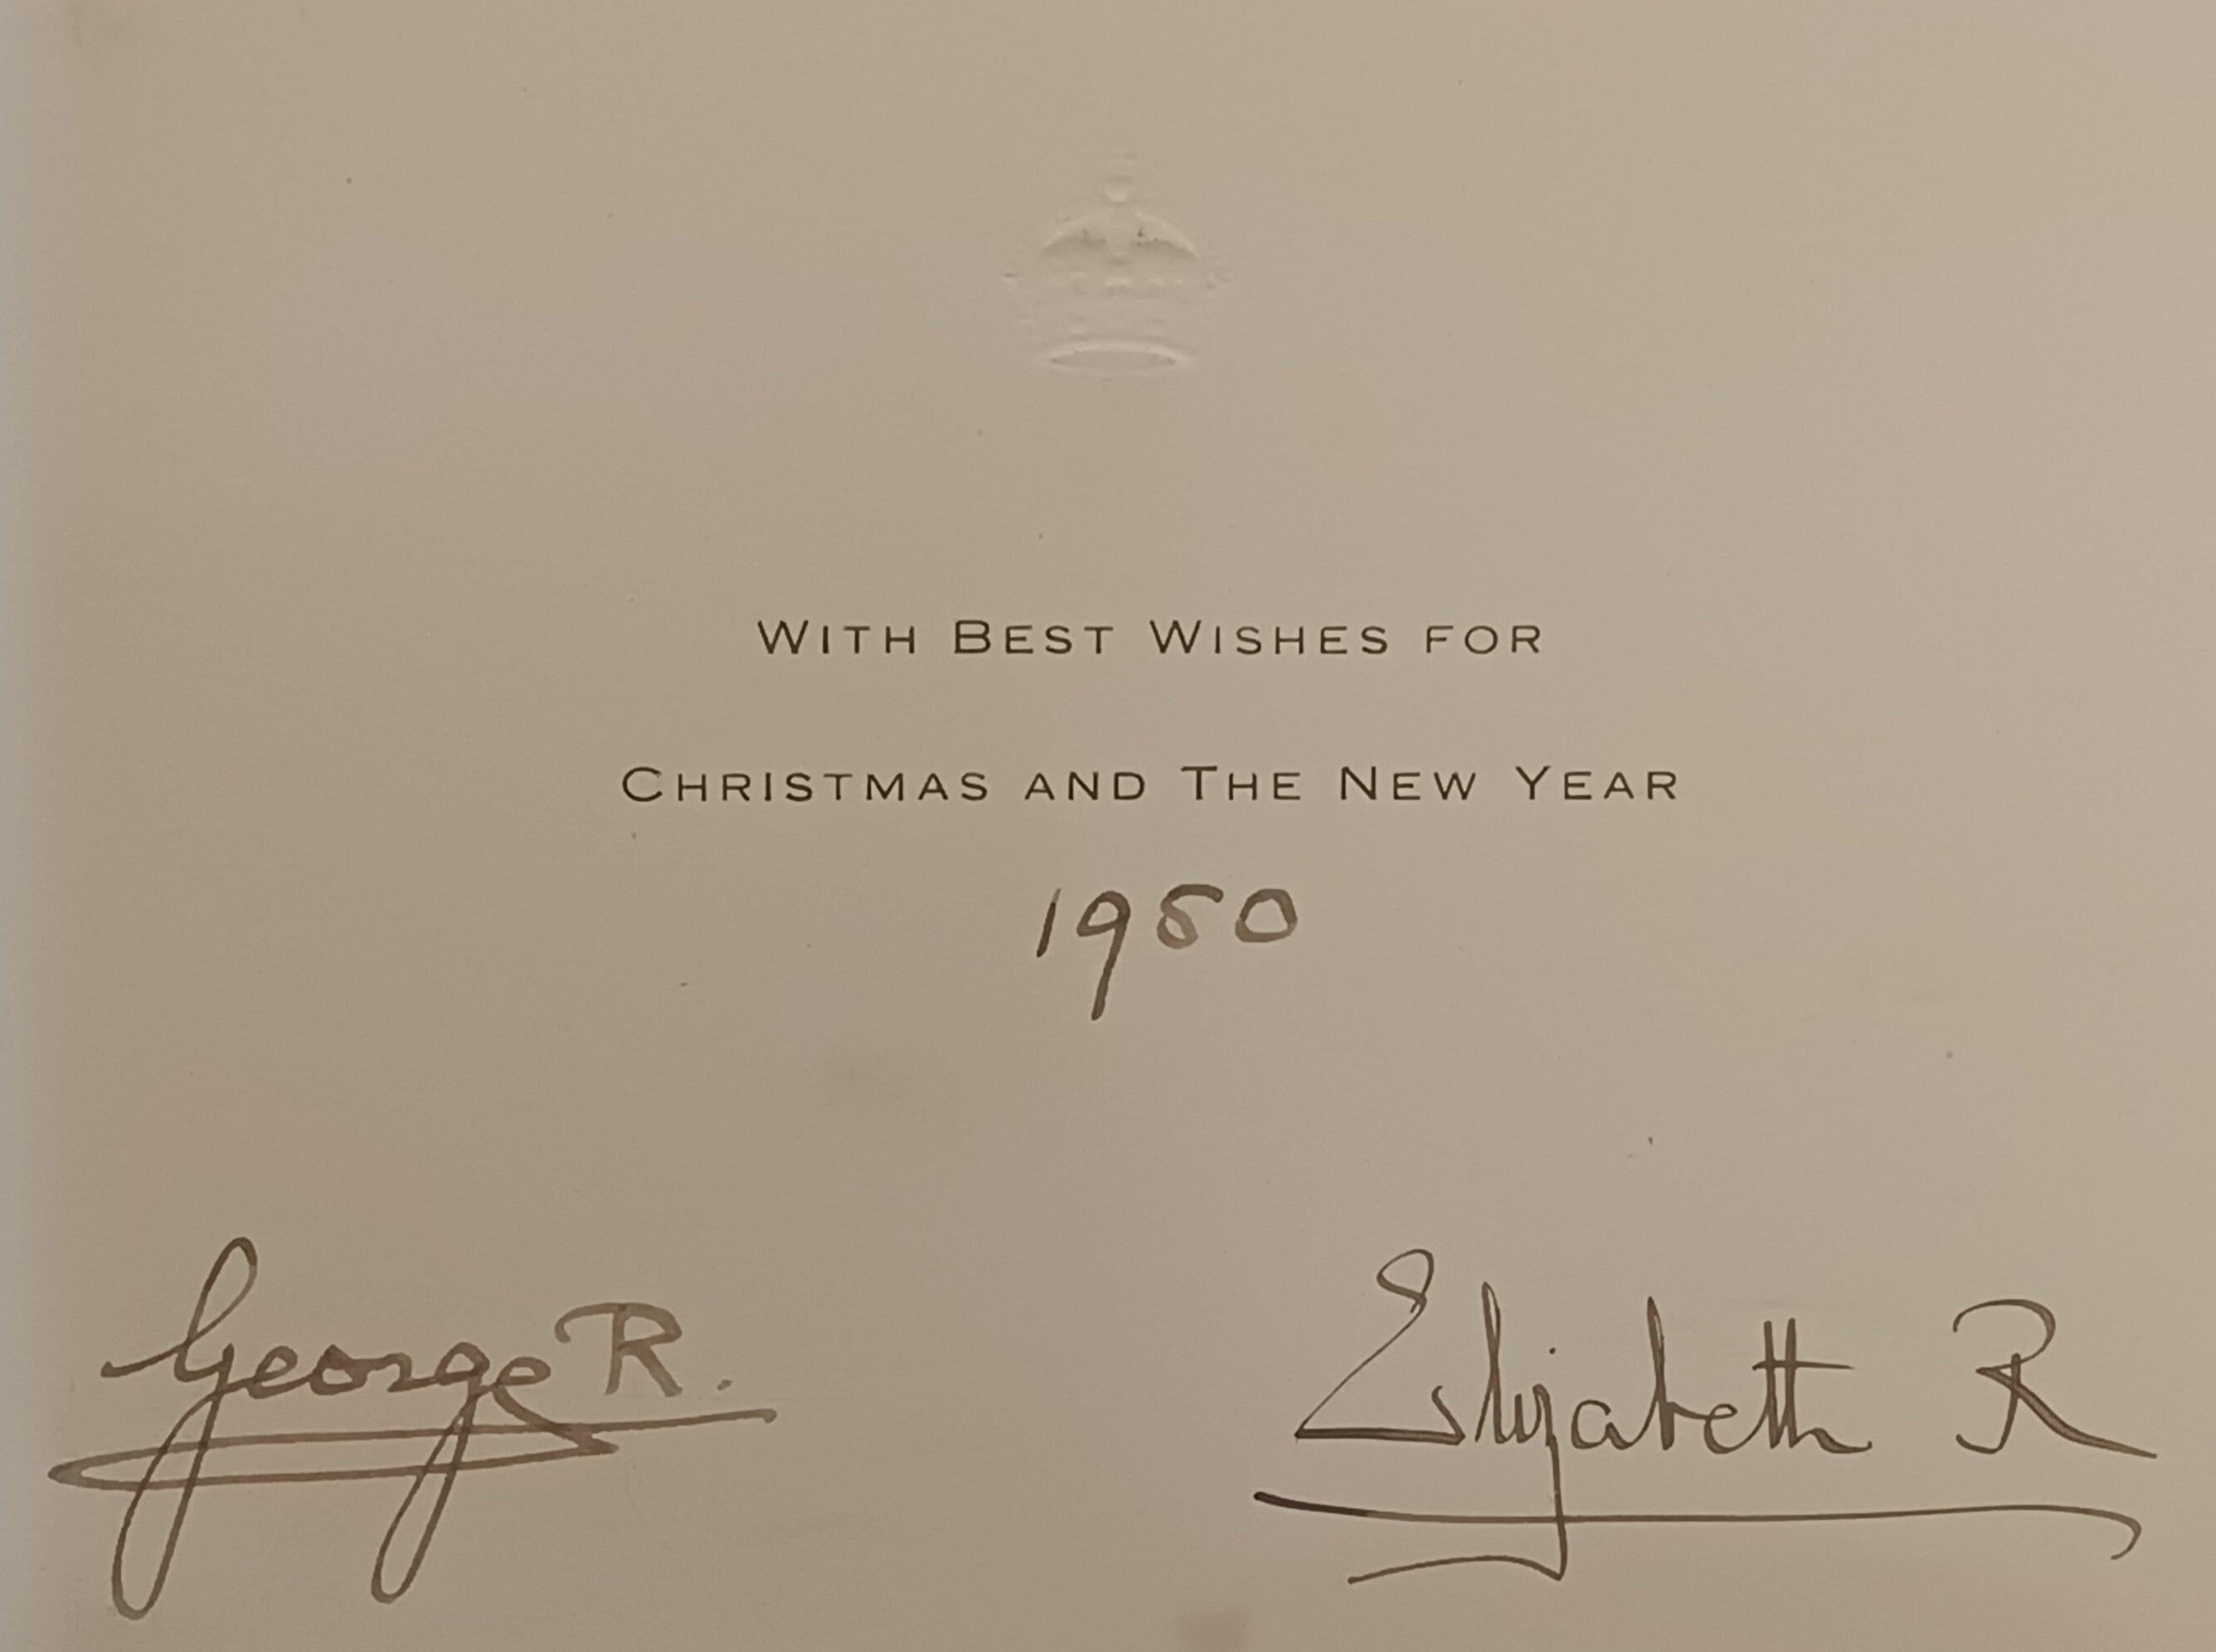 A majestic Royal family Christmas card signed by King George VI and Queen Elizabeth in 1950

Albert Windsor married Lady Elizabeth Bowes-Lyon in 1923. He was the second in line to the throne, after his older brother, Edward.

 

However, in